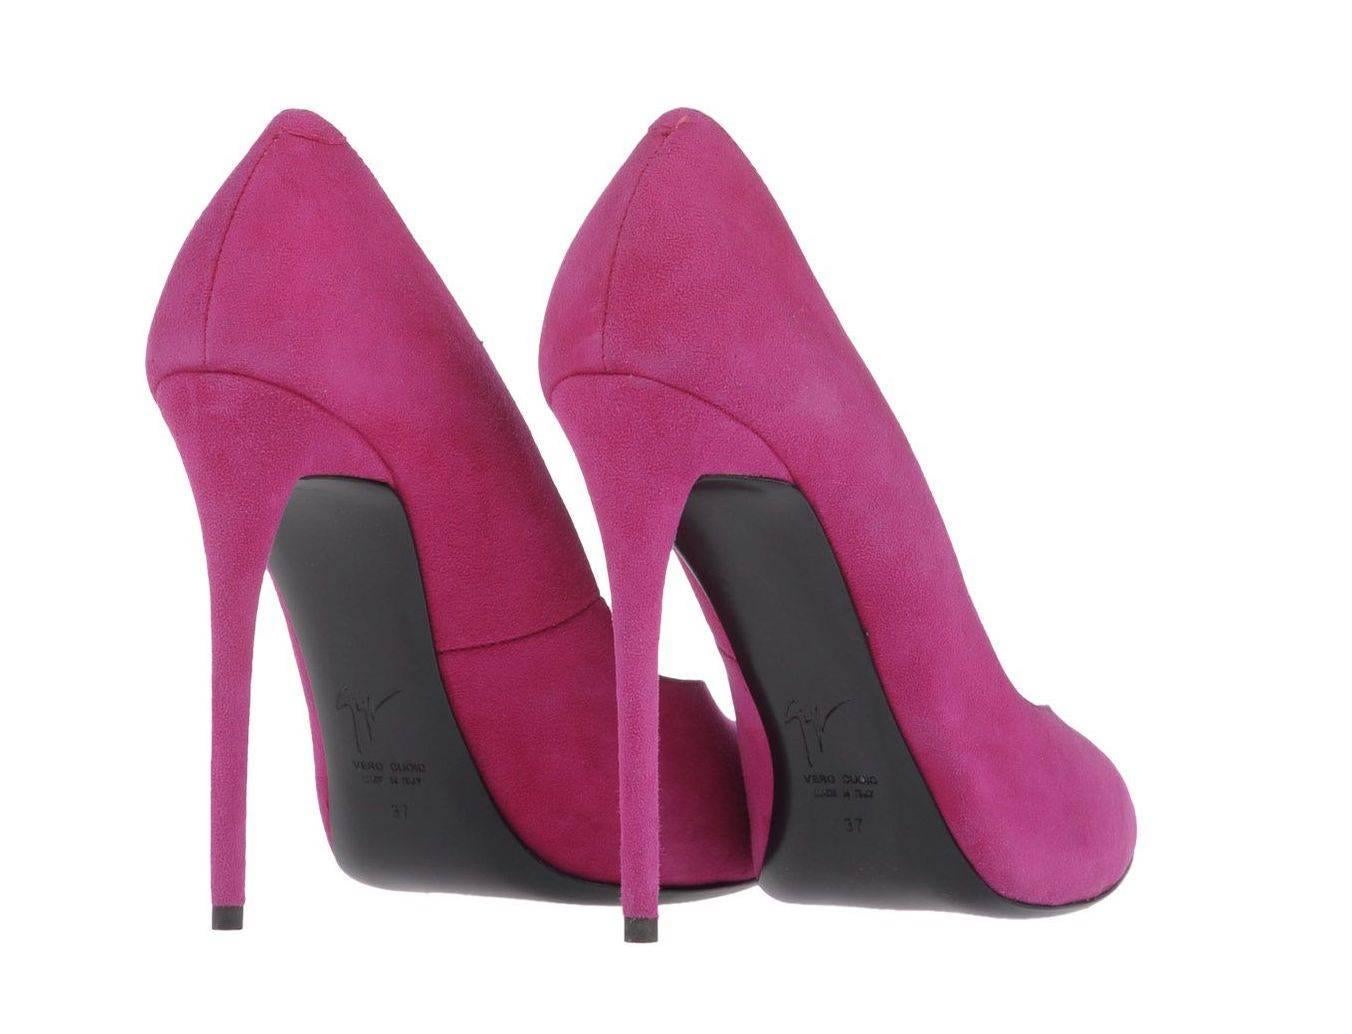 CURATOR'S NOTES

Giuseppe Zanotti New Magenta Pink Fuchsia Suede High Heels Pumps in Box 

Size IT 36
Suede 
Slip on
Made in France
Heel height 4.5"
Includes original Giuseppe Zanotti box